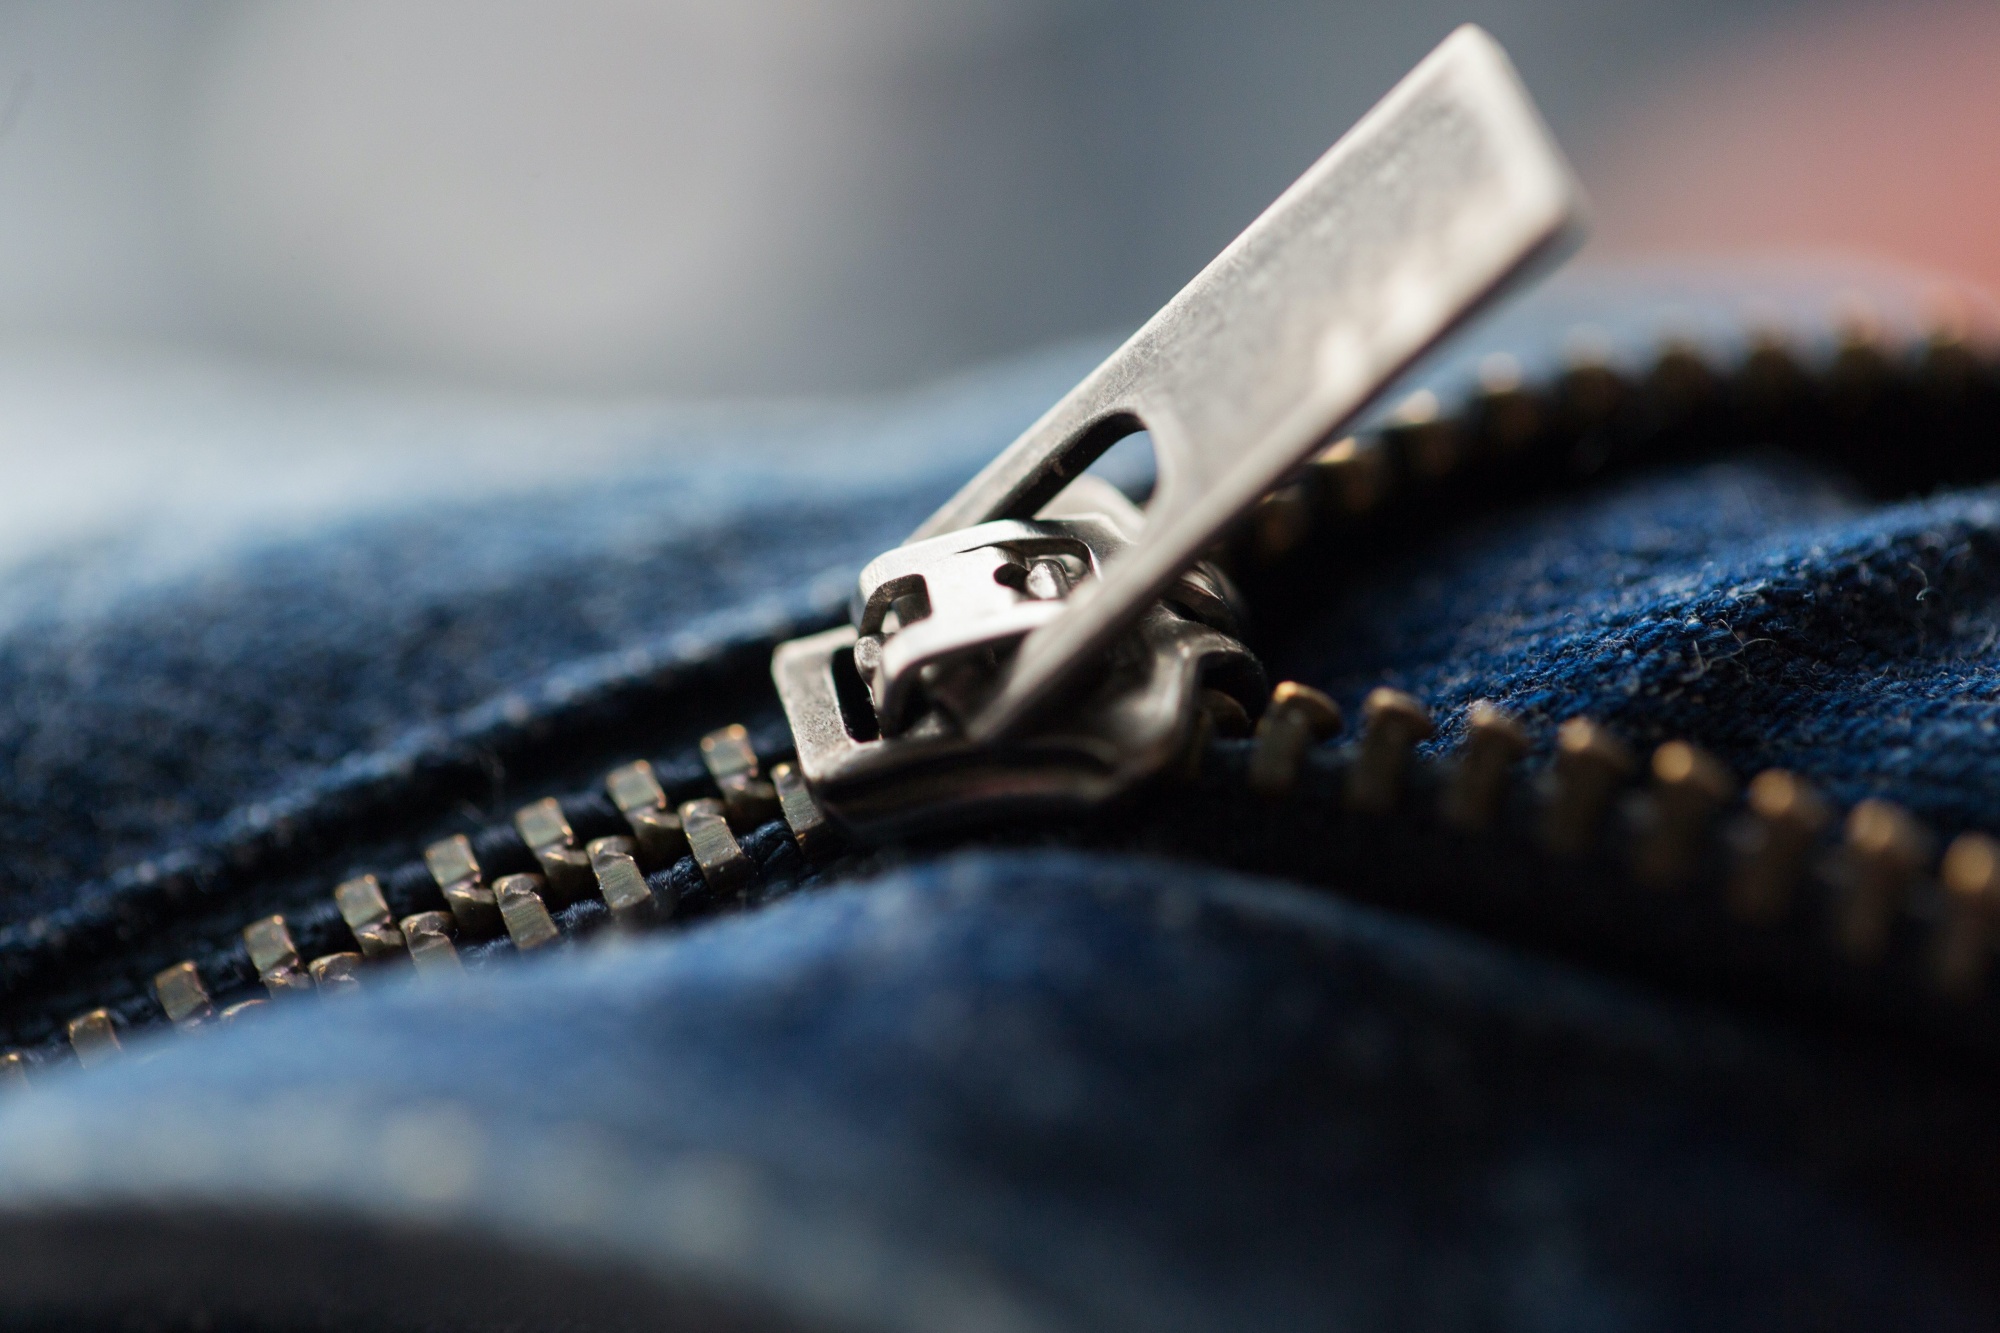 how to pick the right pair of jeans, make sure they have a YKK zipper